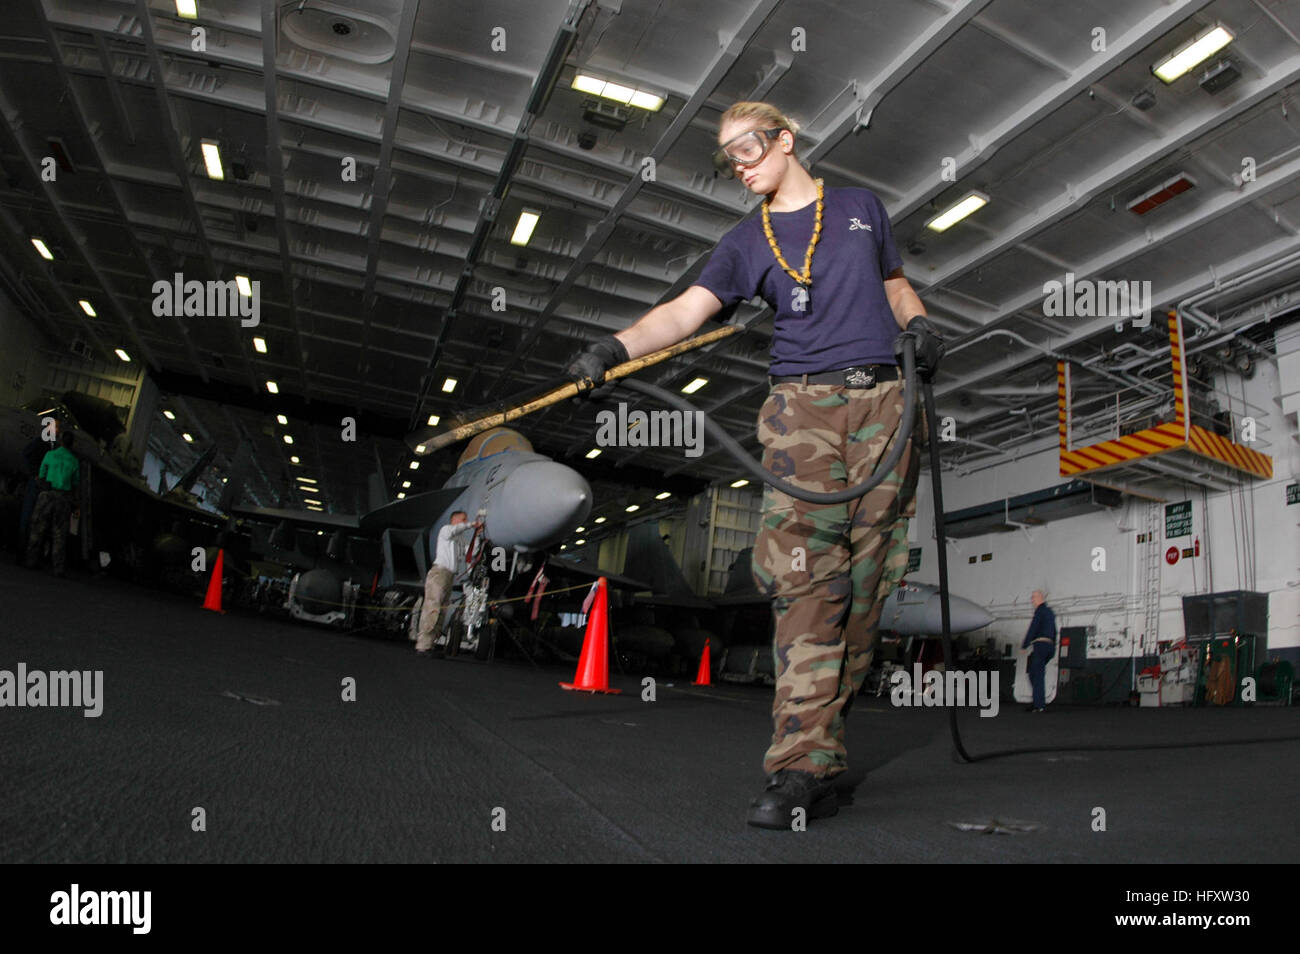 091014-N-2688M-009 INDIAN OCEAN (Oct. 14, 2009) Aviation Boatswain’s Mate (Handling) Airman Sarah Steinert uses a low-powered air blow-down hose to clear foreign objects and dirt off the deck of the hangar bay aboard the aircraft carrier USS Nimitz (CVN 68).  The Nimitz Carrier Strike Group is on a routine deployment to the U.S. 5th Fleet area of responsibility.  (U.S. Navy photo by Mass Communication Specialist 2nd Class Joseph H. Moon/Released) US Navy 091014-N-2688M-009 Aviation Boatswain's Mate (Handling) Airman Sarah Steinert uses a low-powered air blow-down hose Stock Photo